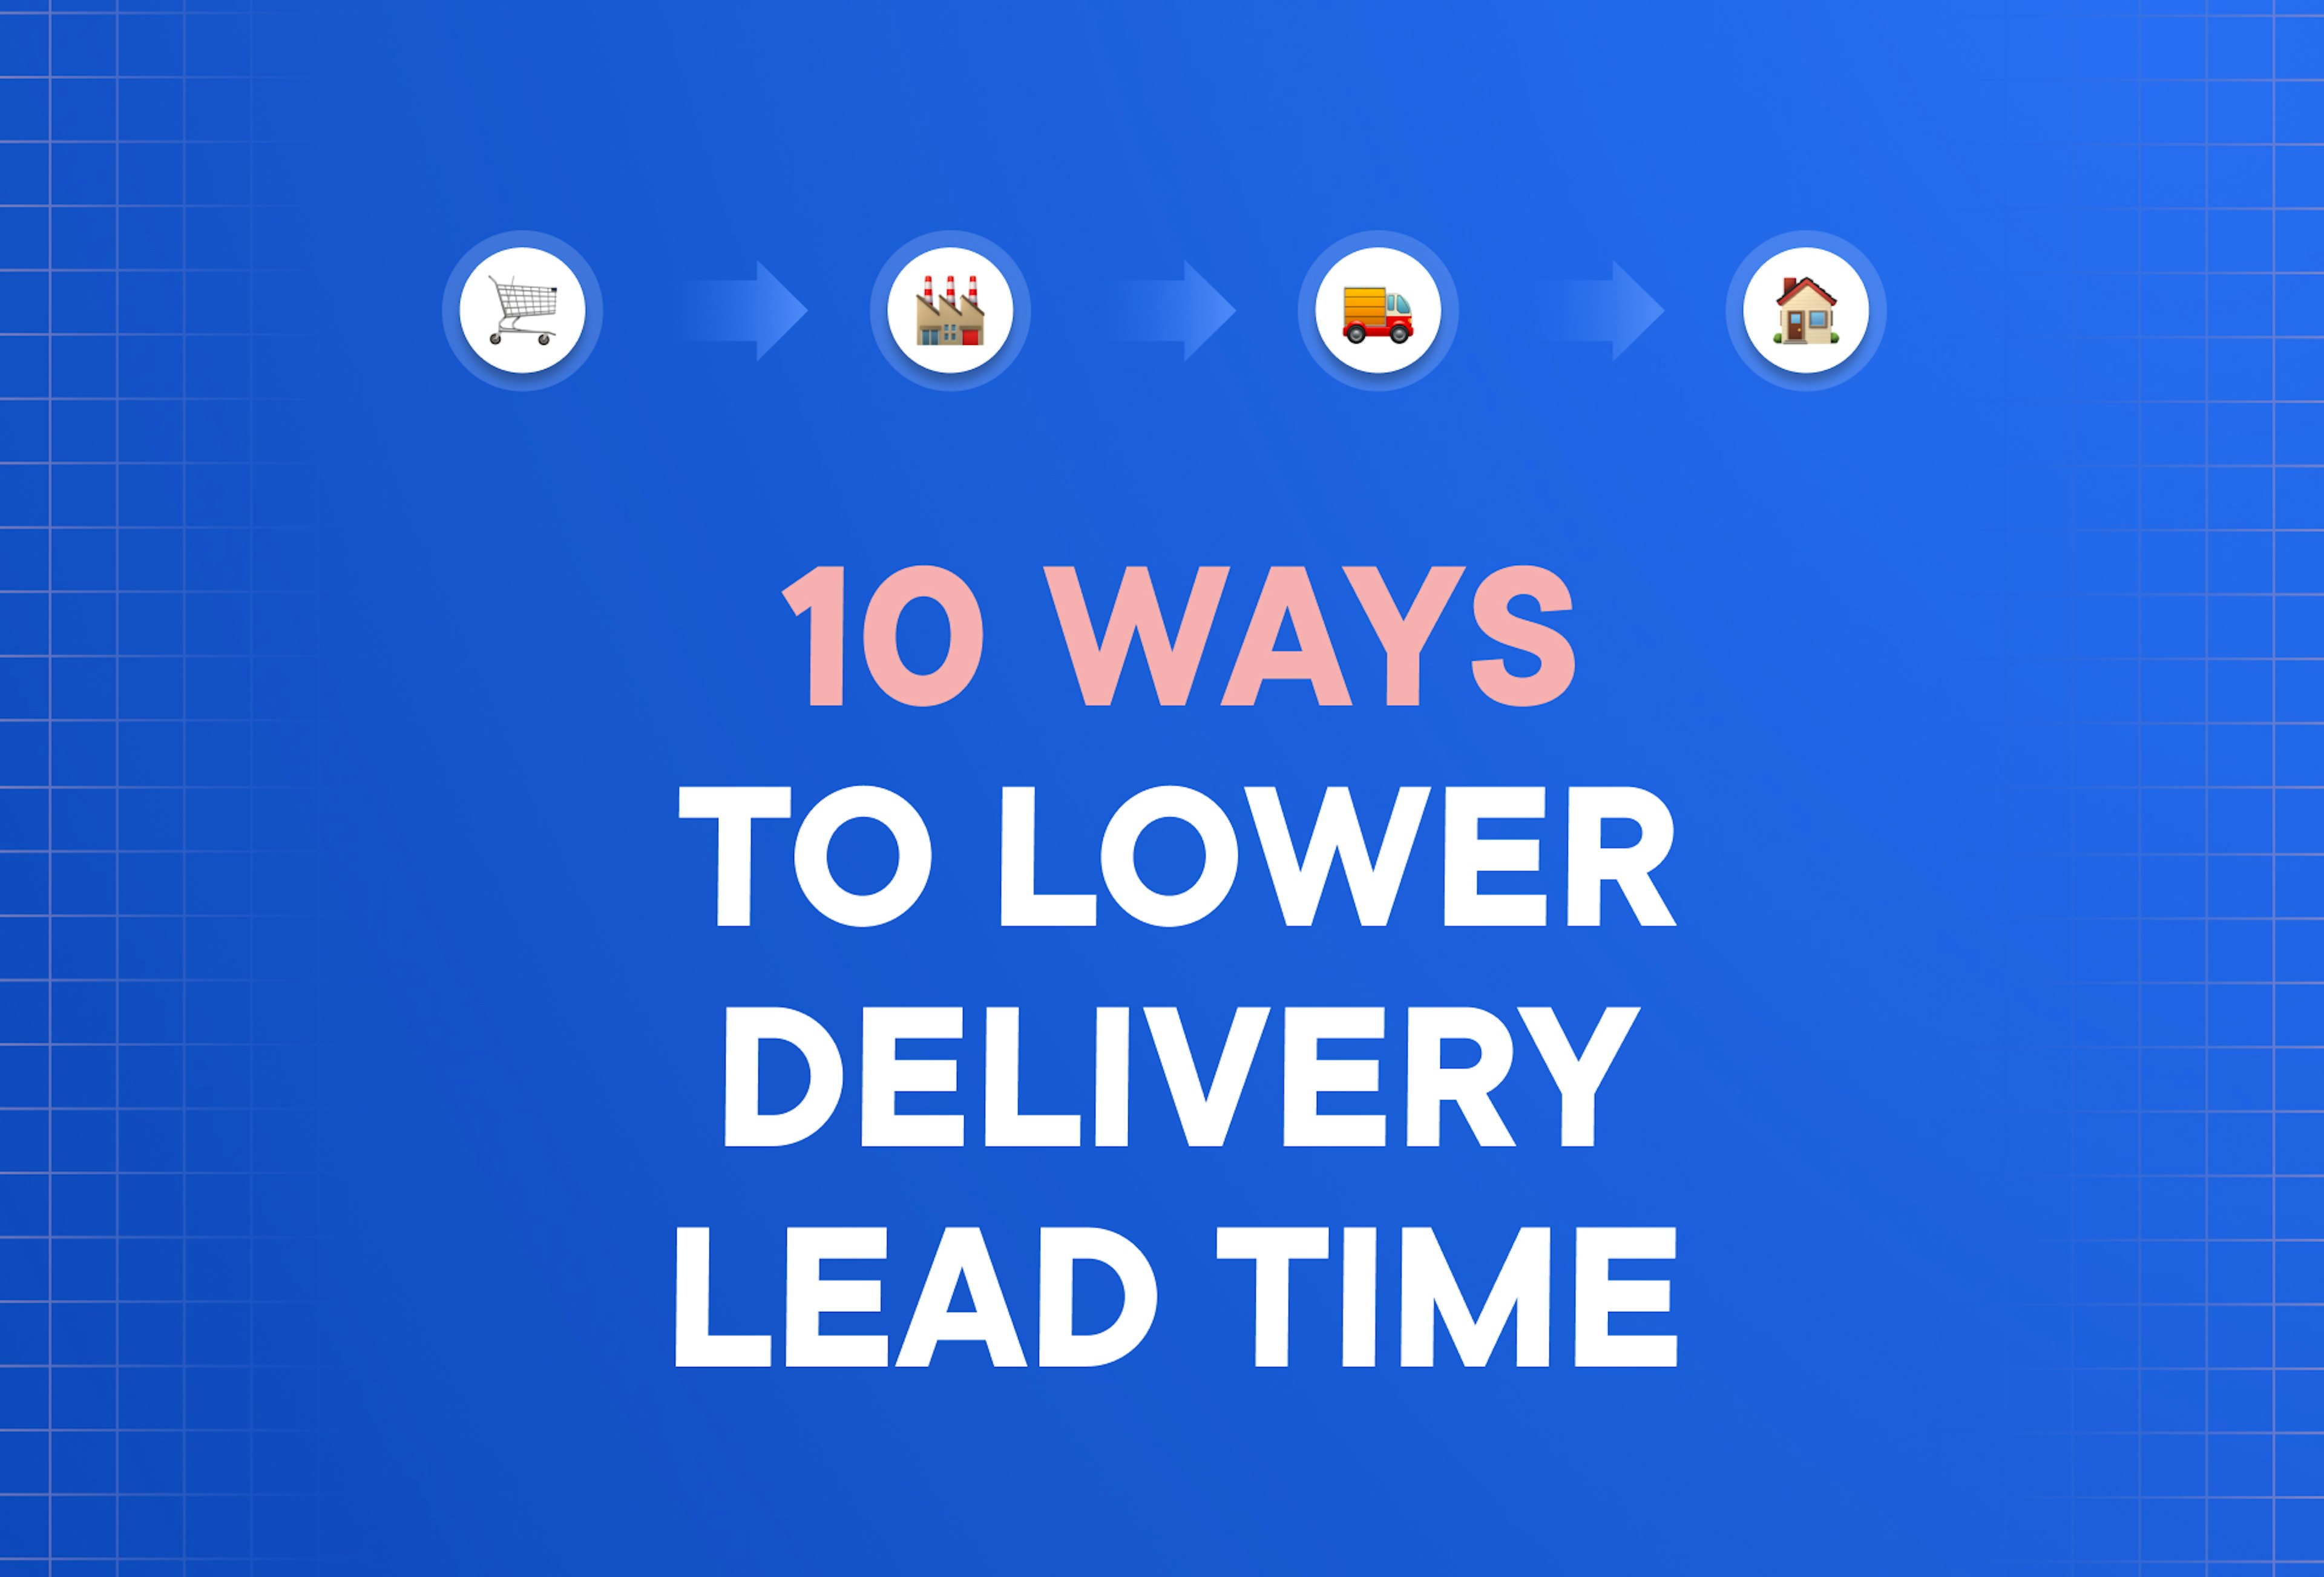 10-ways-to-lower-delivery-lead-time